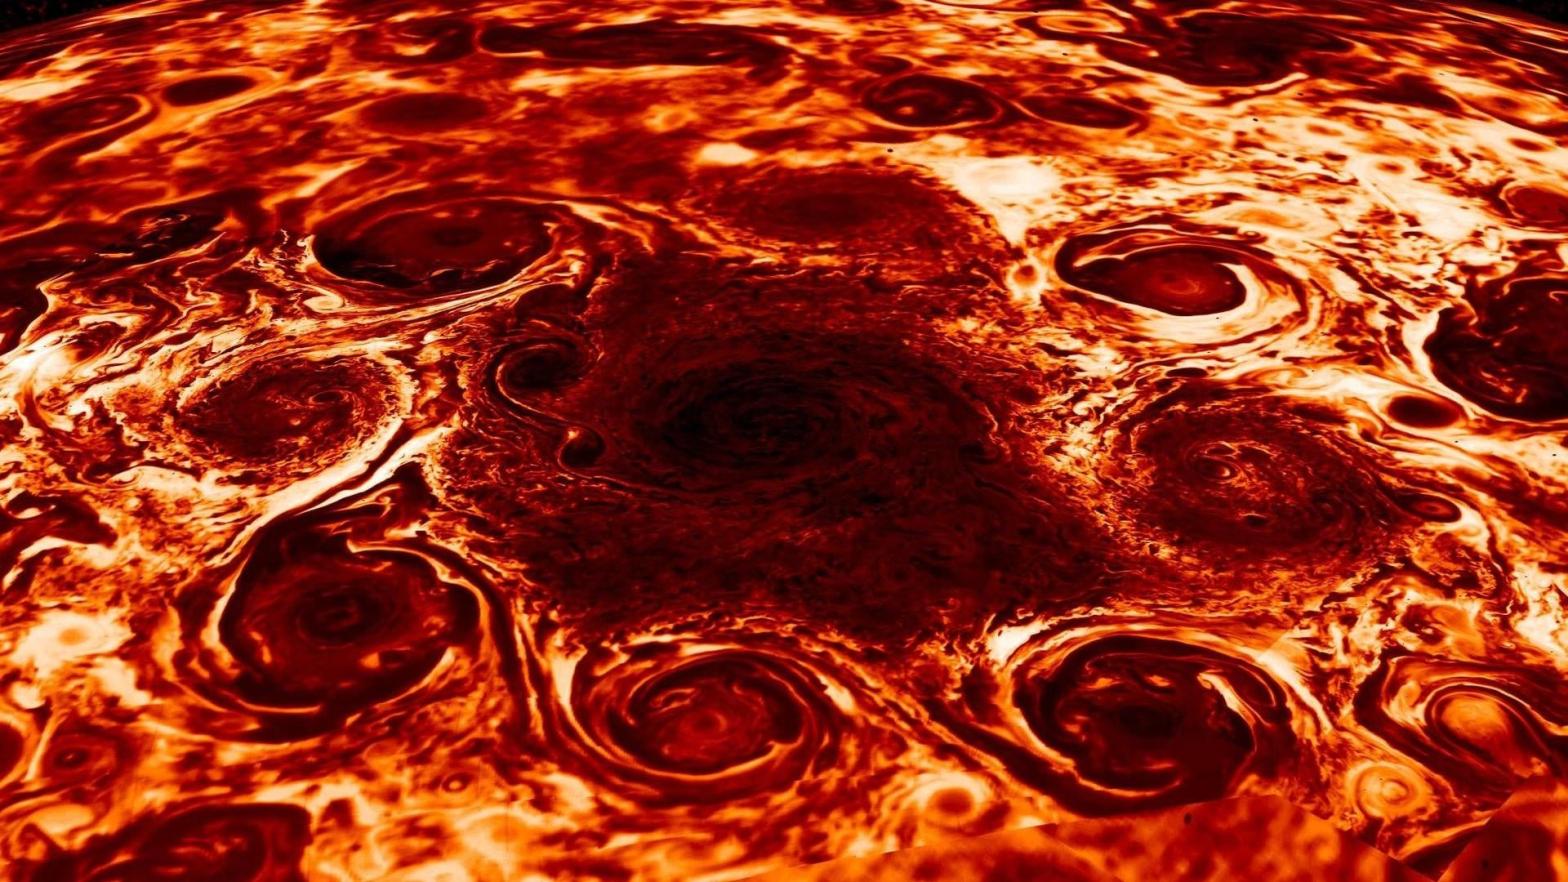 This image from the Juno spacecraft shows the nine cyclones at Jupiter's north pole in infrared. (Image: NASA/JPL-Caltech/SwRI/ASI/INAF/JIRAM)